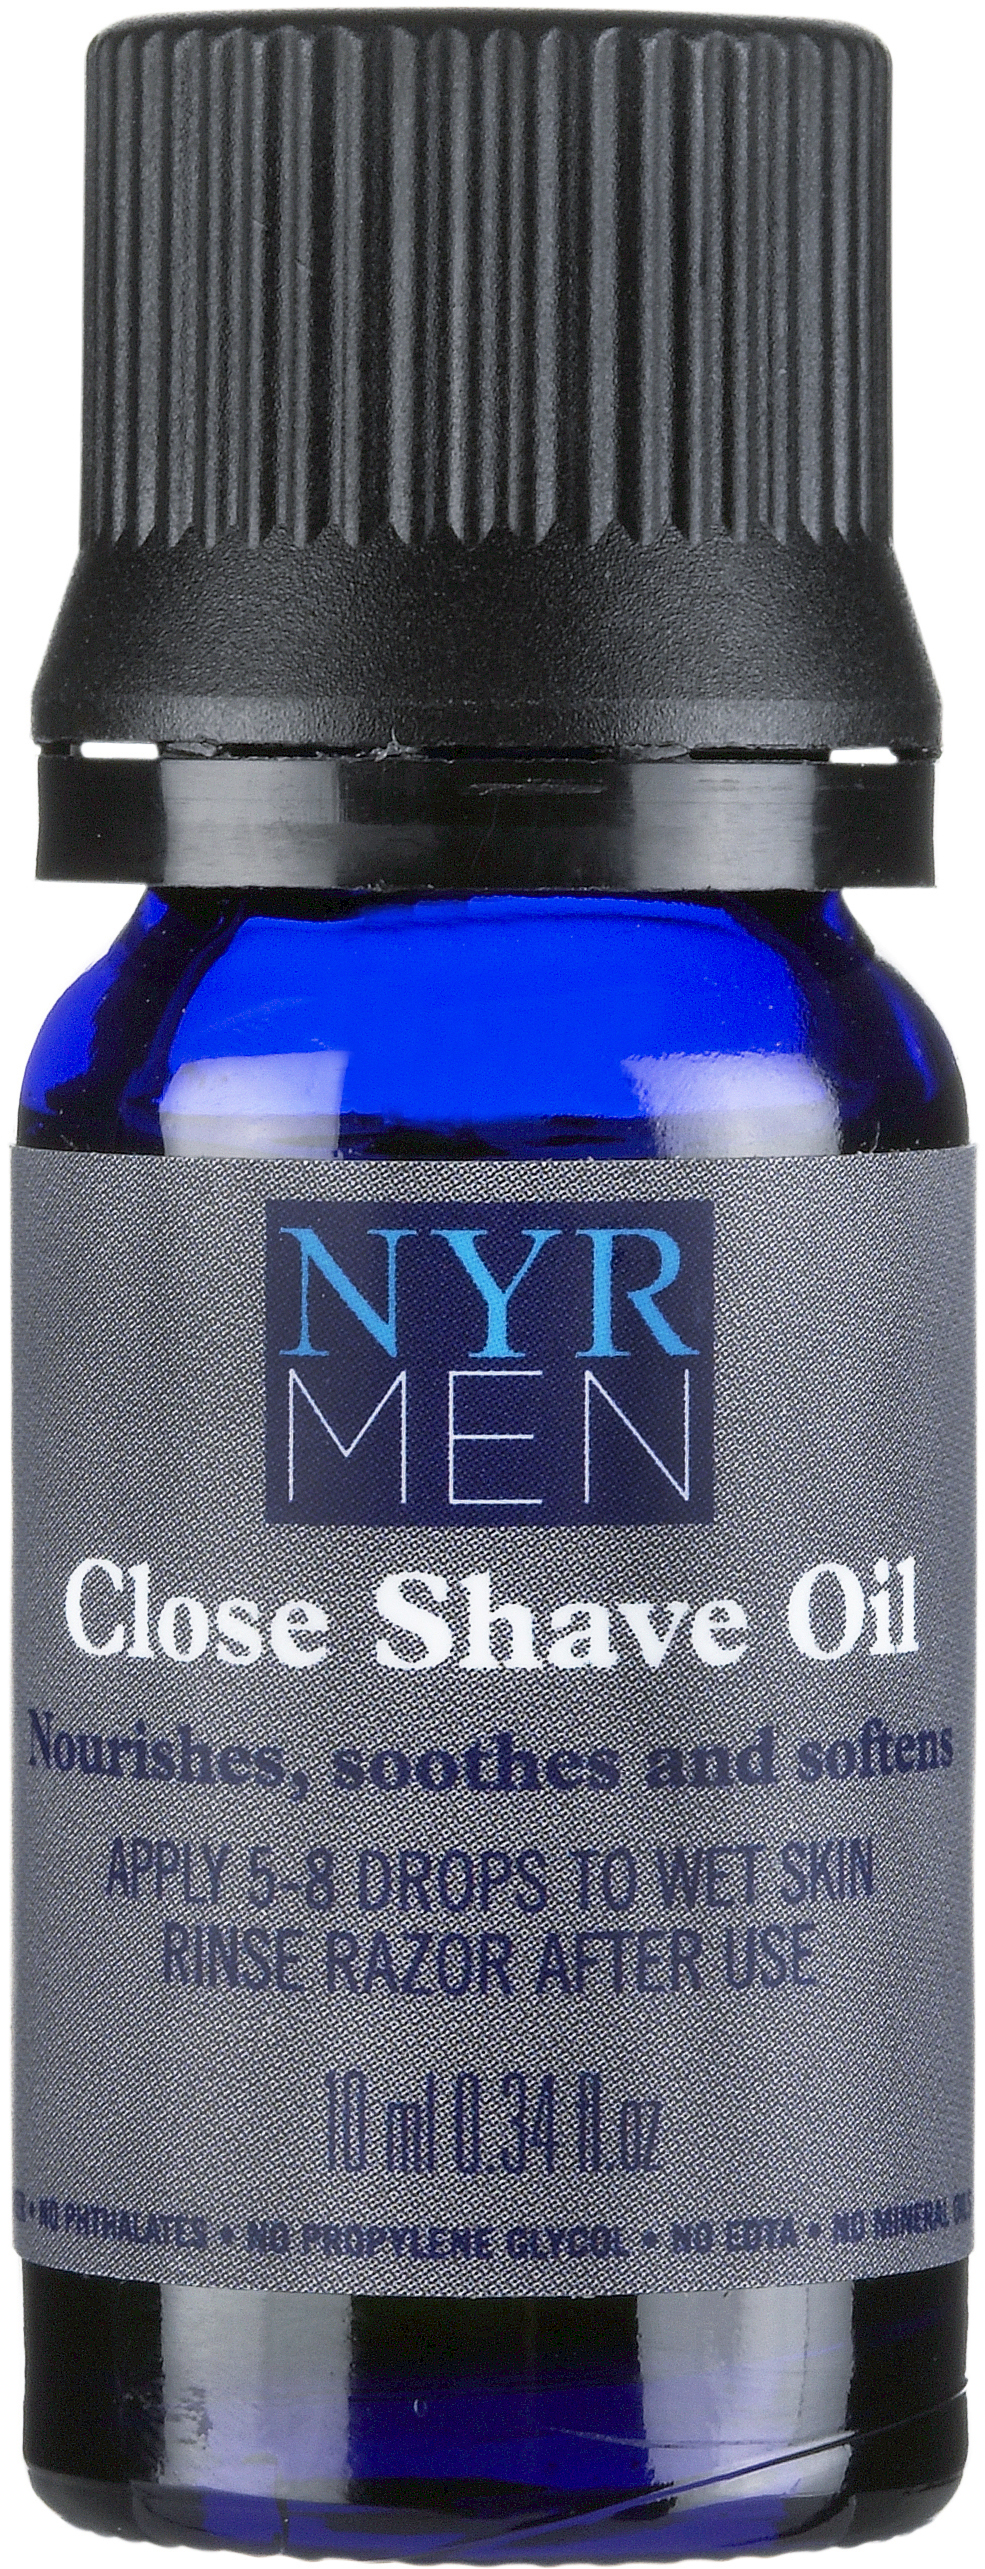 Neal’s Yard Remedies Close Shave Oil 10ml